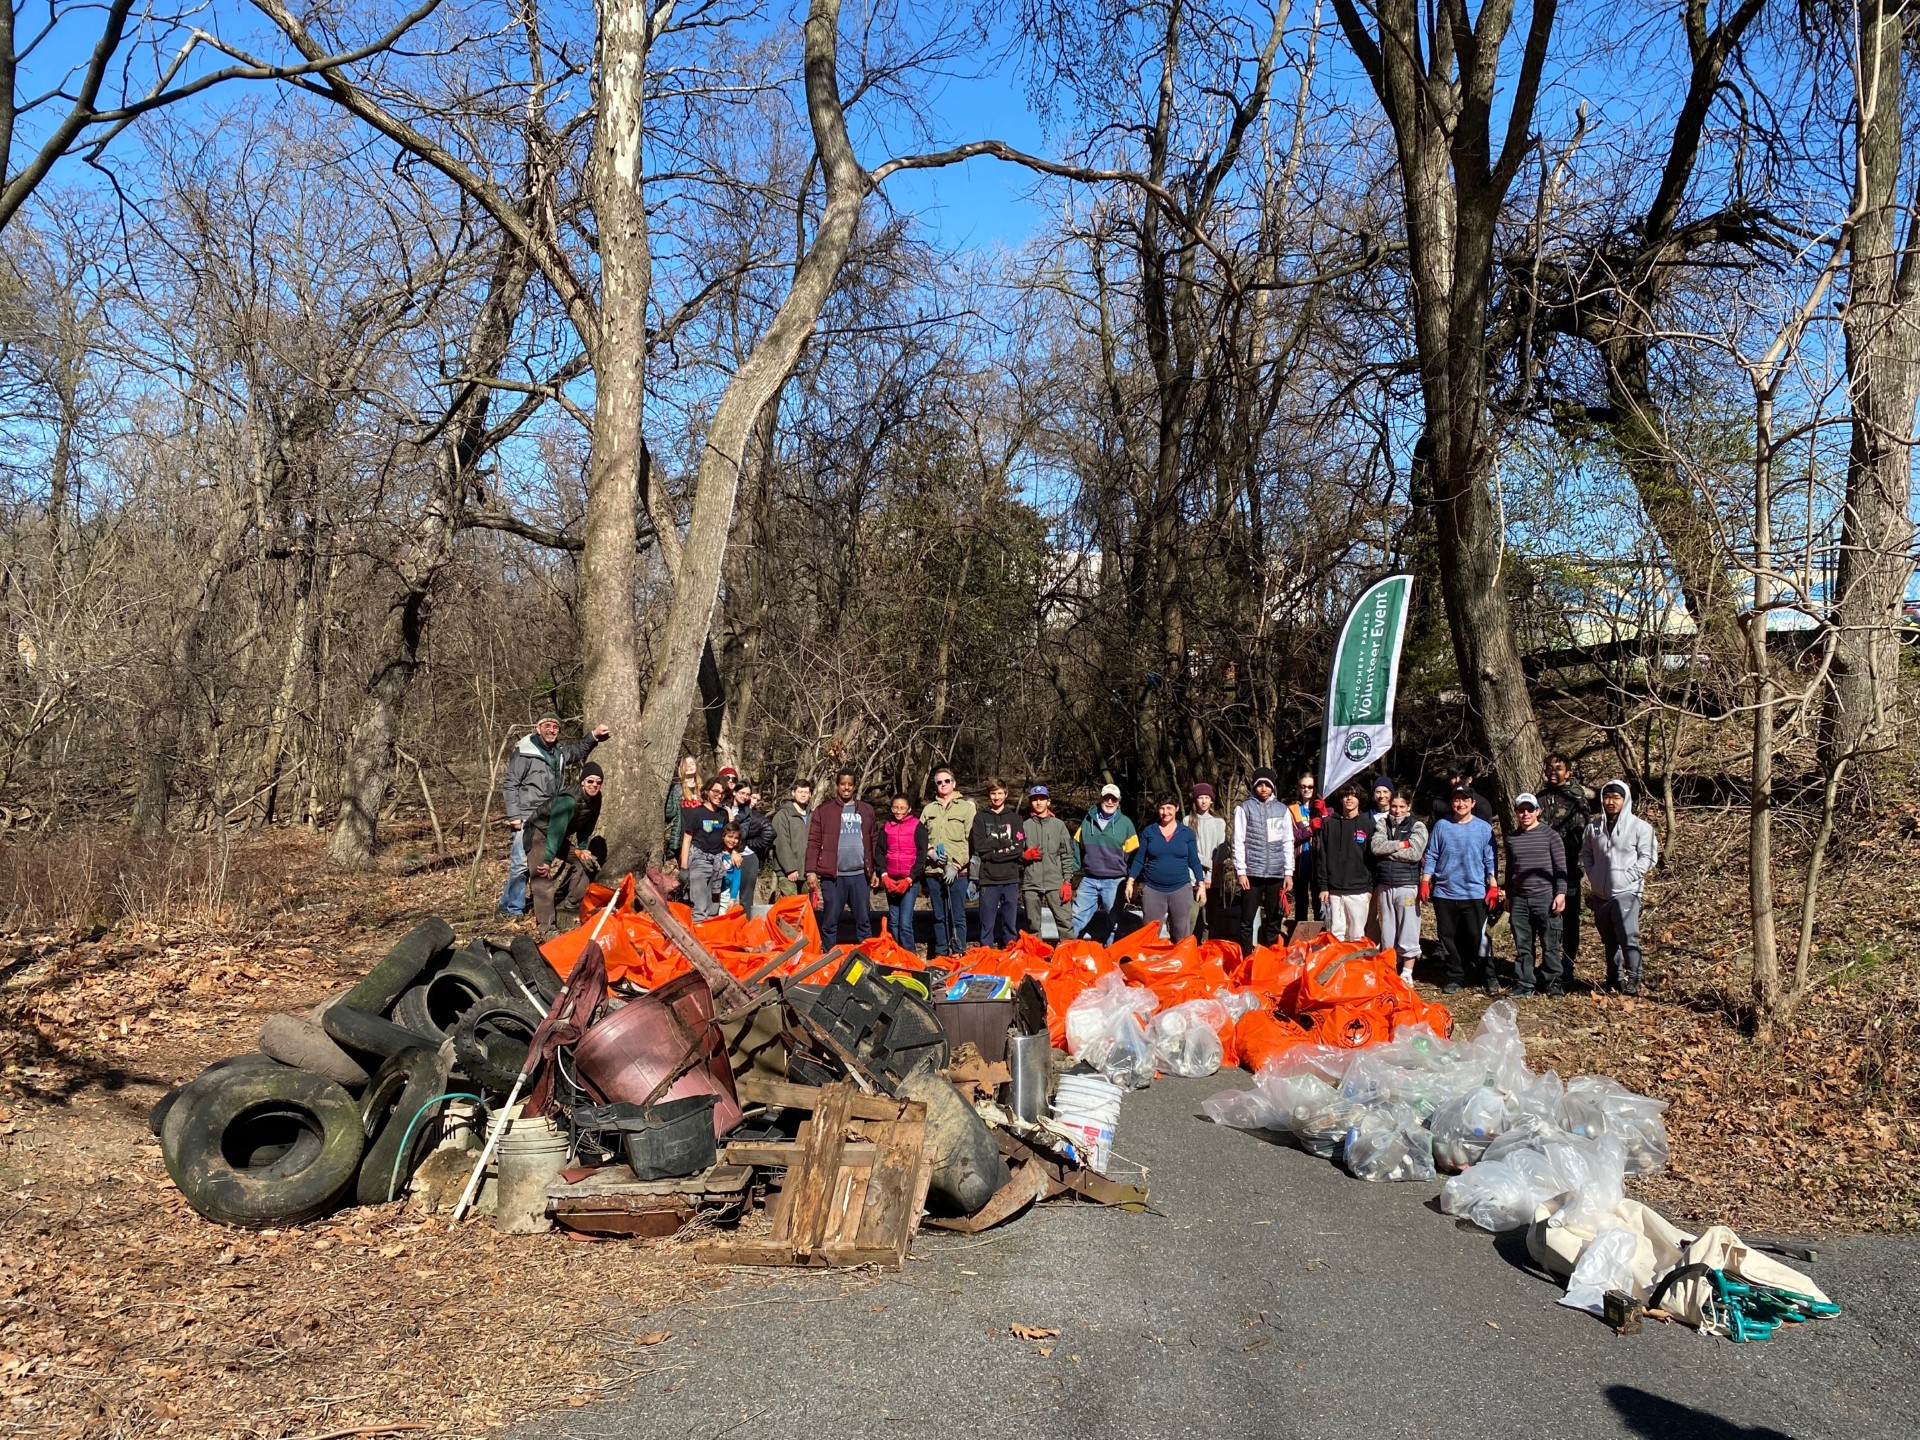 Volunteer group at a park standing in front of over 30 trash bags and tires.